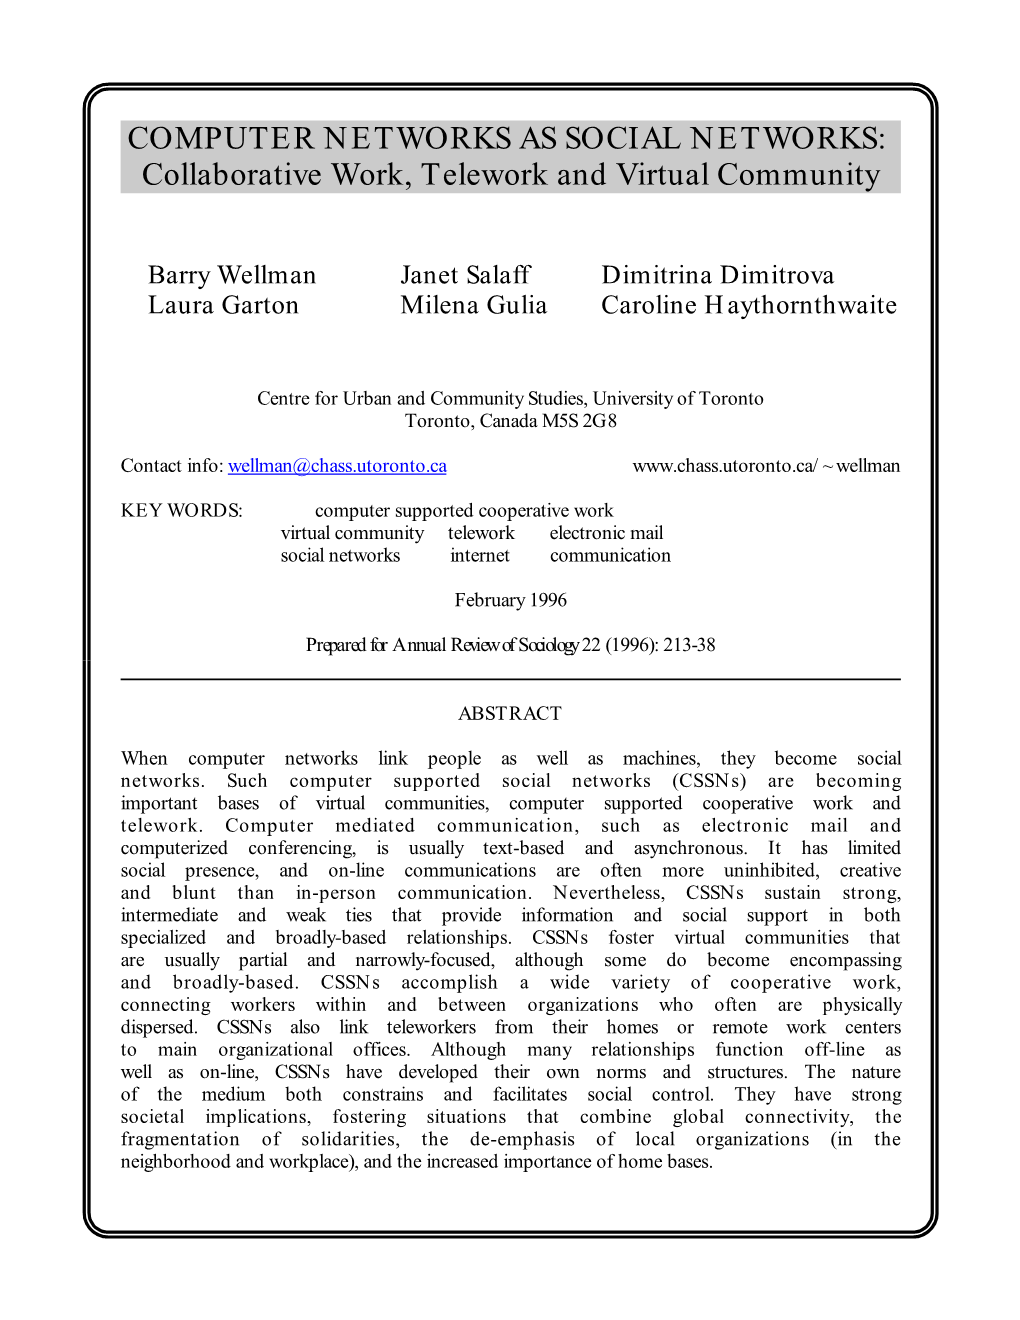 COMPUTER NETWORKS AS SOCIAL NETWORKS: Collaborative Work, Telework and Virtual Community